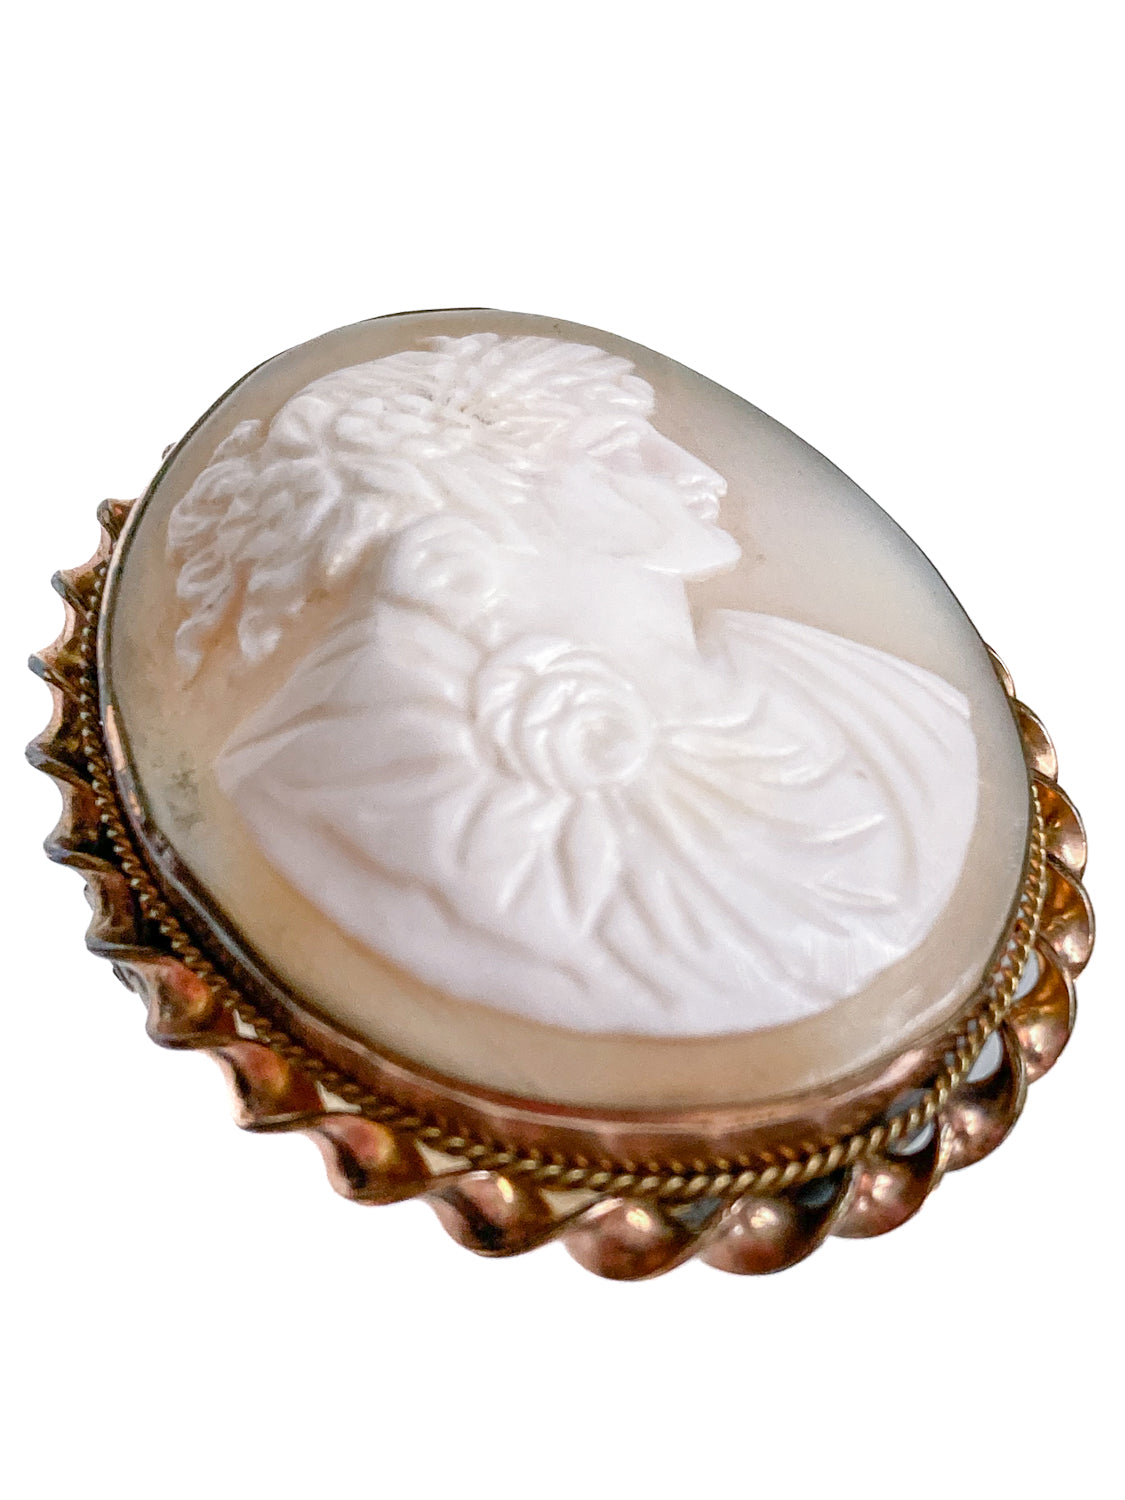 Vintage Twist Oval Gold Toned Italian Shell Carved Cameo Brooch Pin